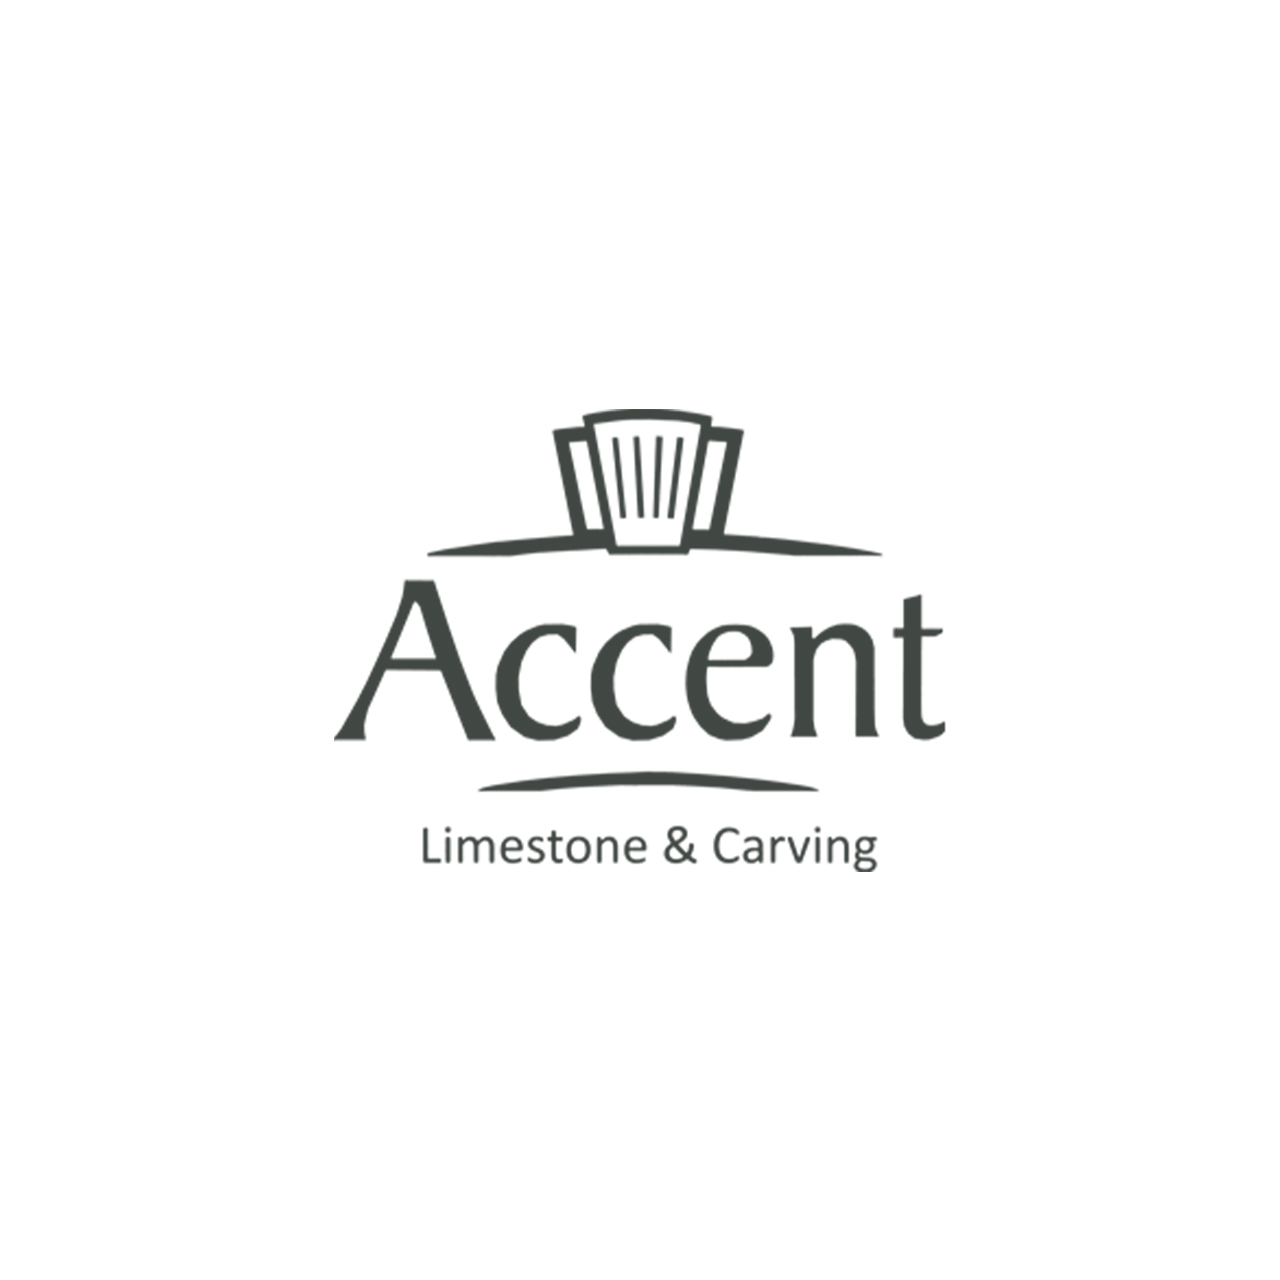 Accent Limestone & Carving